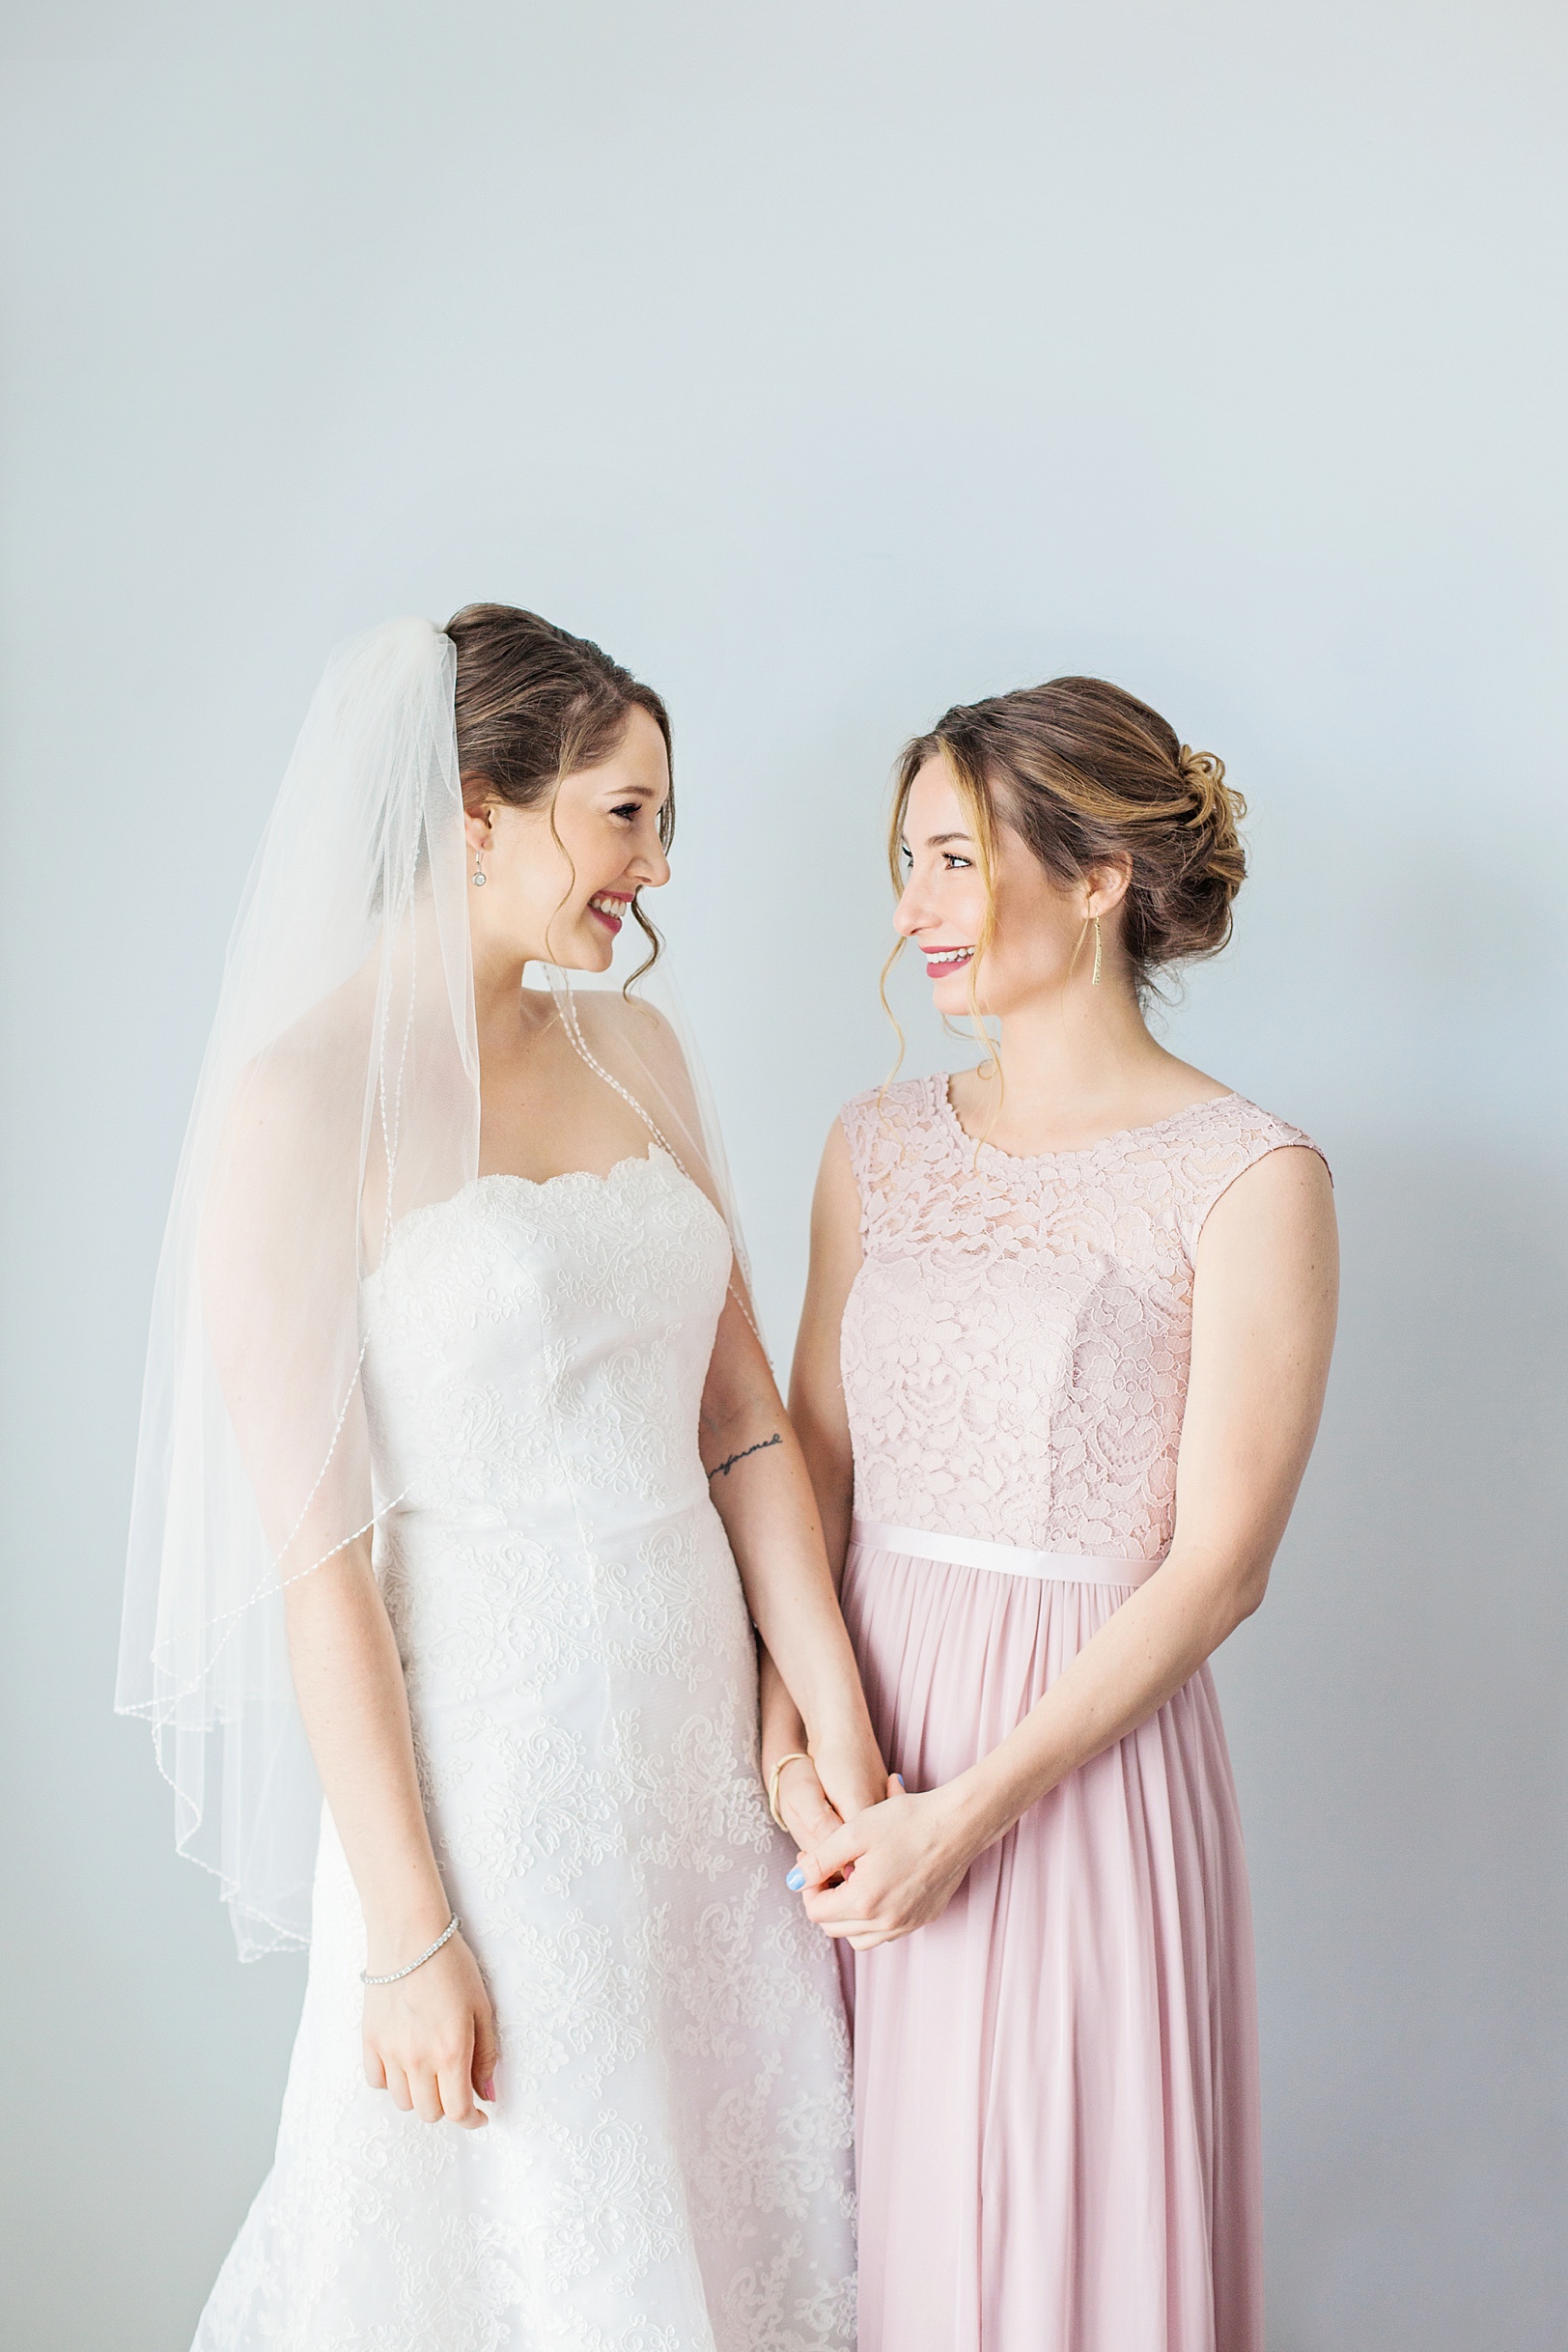 Bride and her Sister as Maid of Honor | Kaitlin Scott Photography